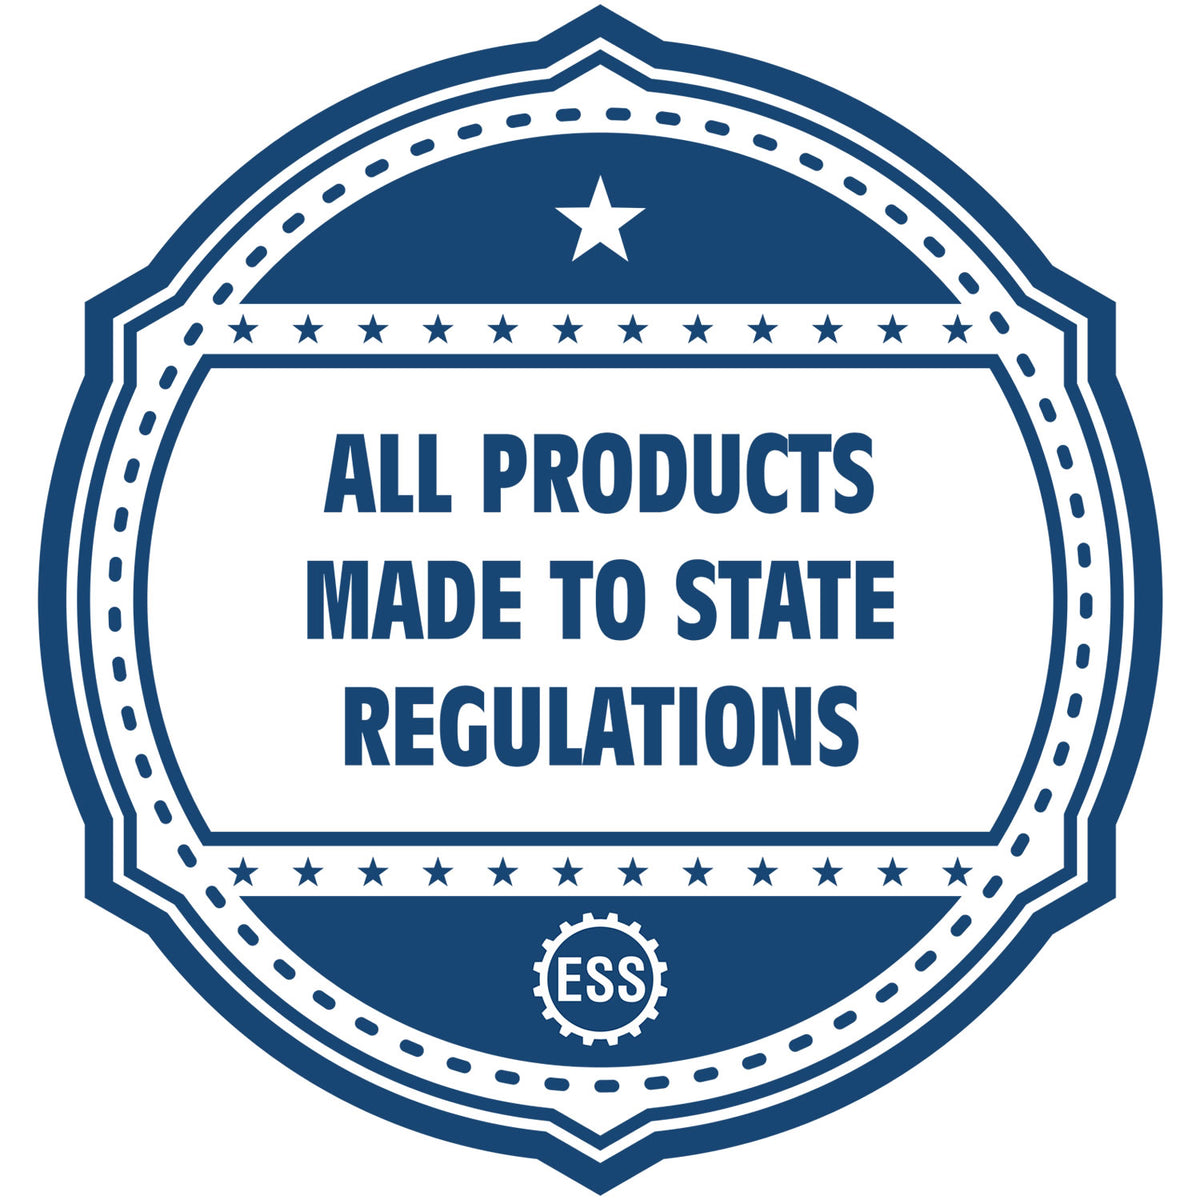 An icon or badge element for the Digital Virginia Landscape Architect Stamp showing that this product is made in compliance with state regulations.